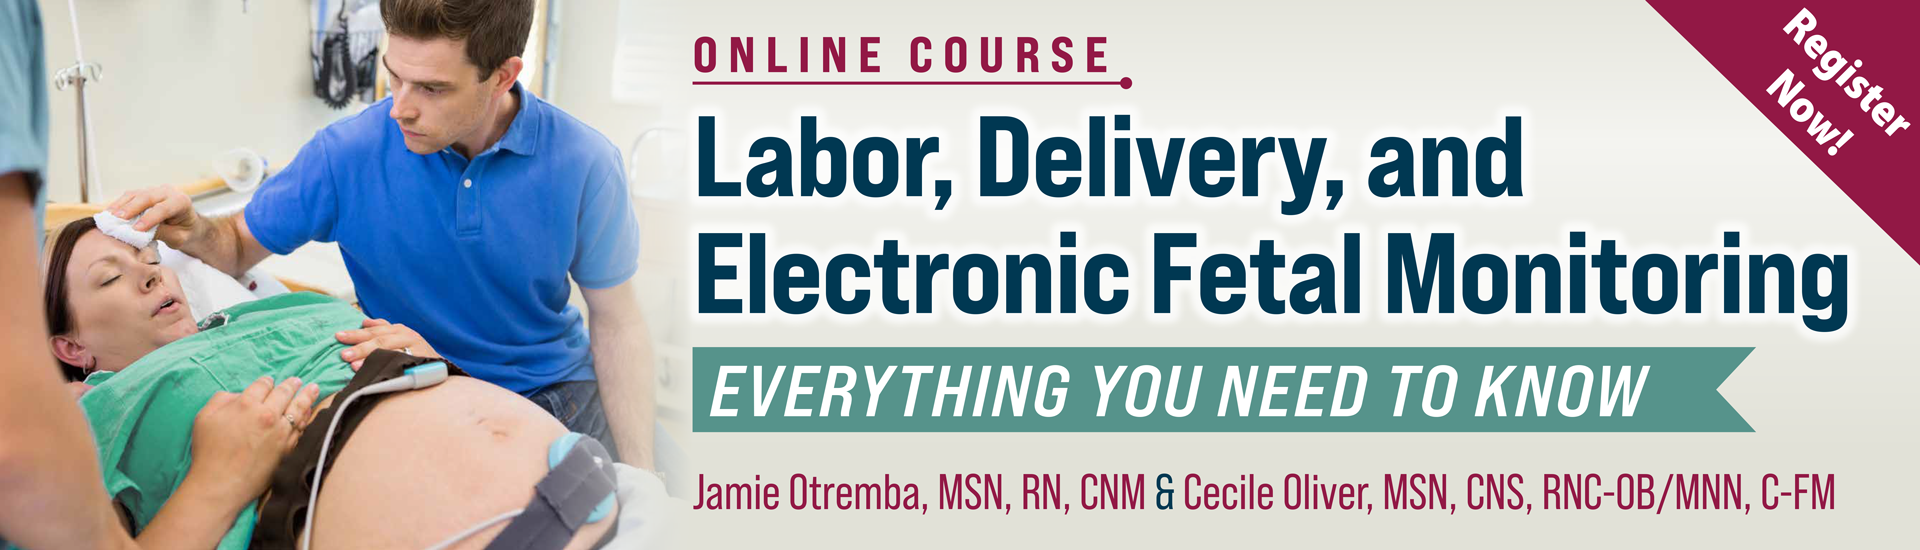 Labor, Delivery, and Electronic Fetal Monitoring Online Course